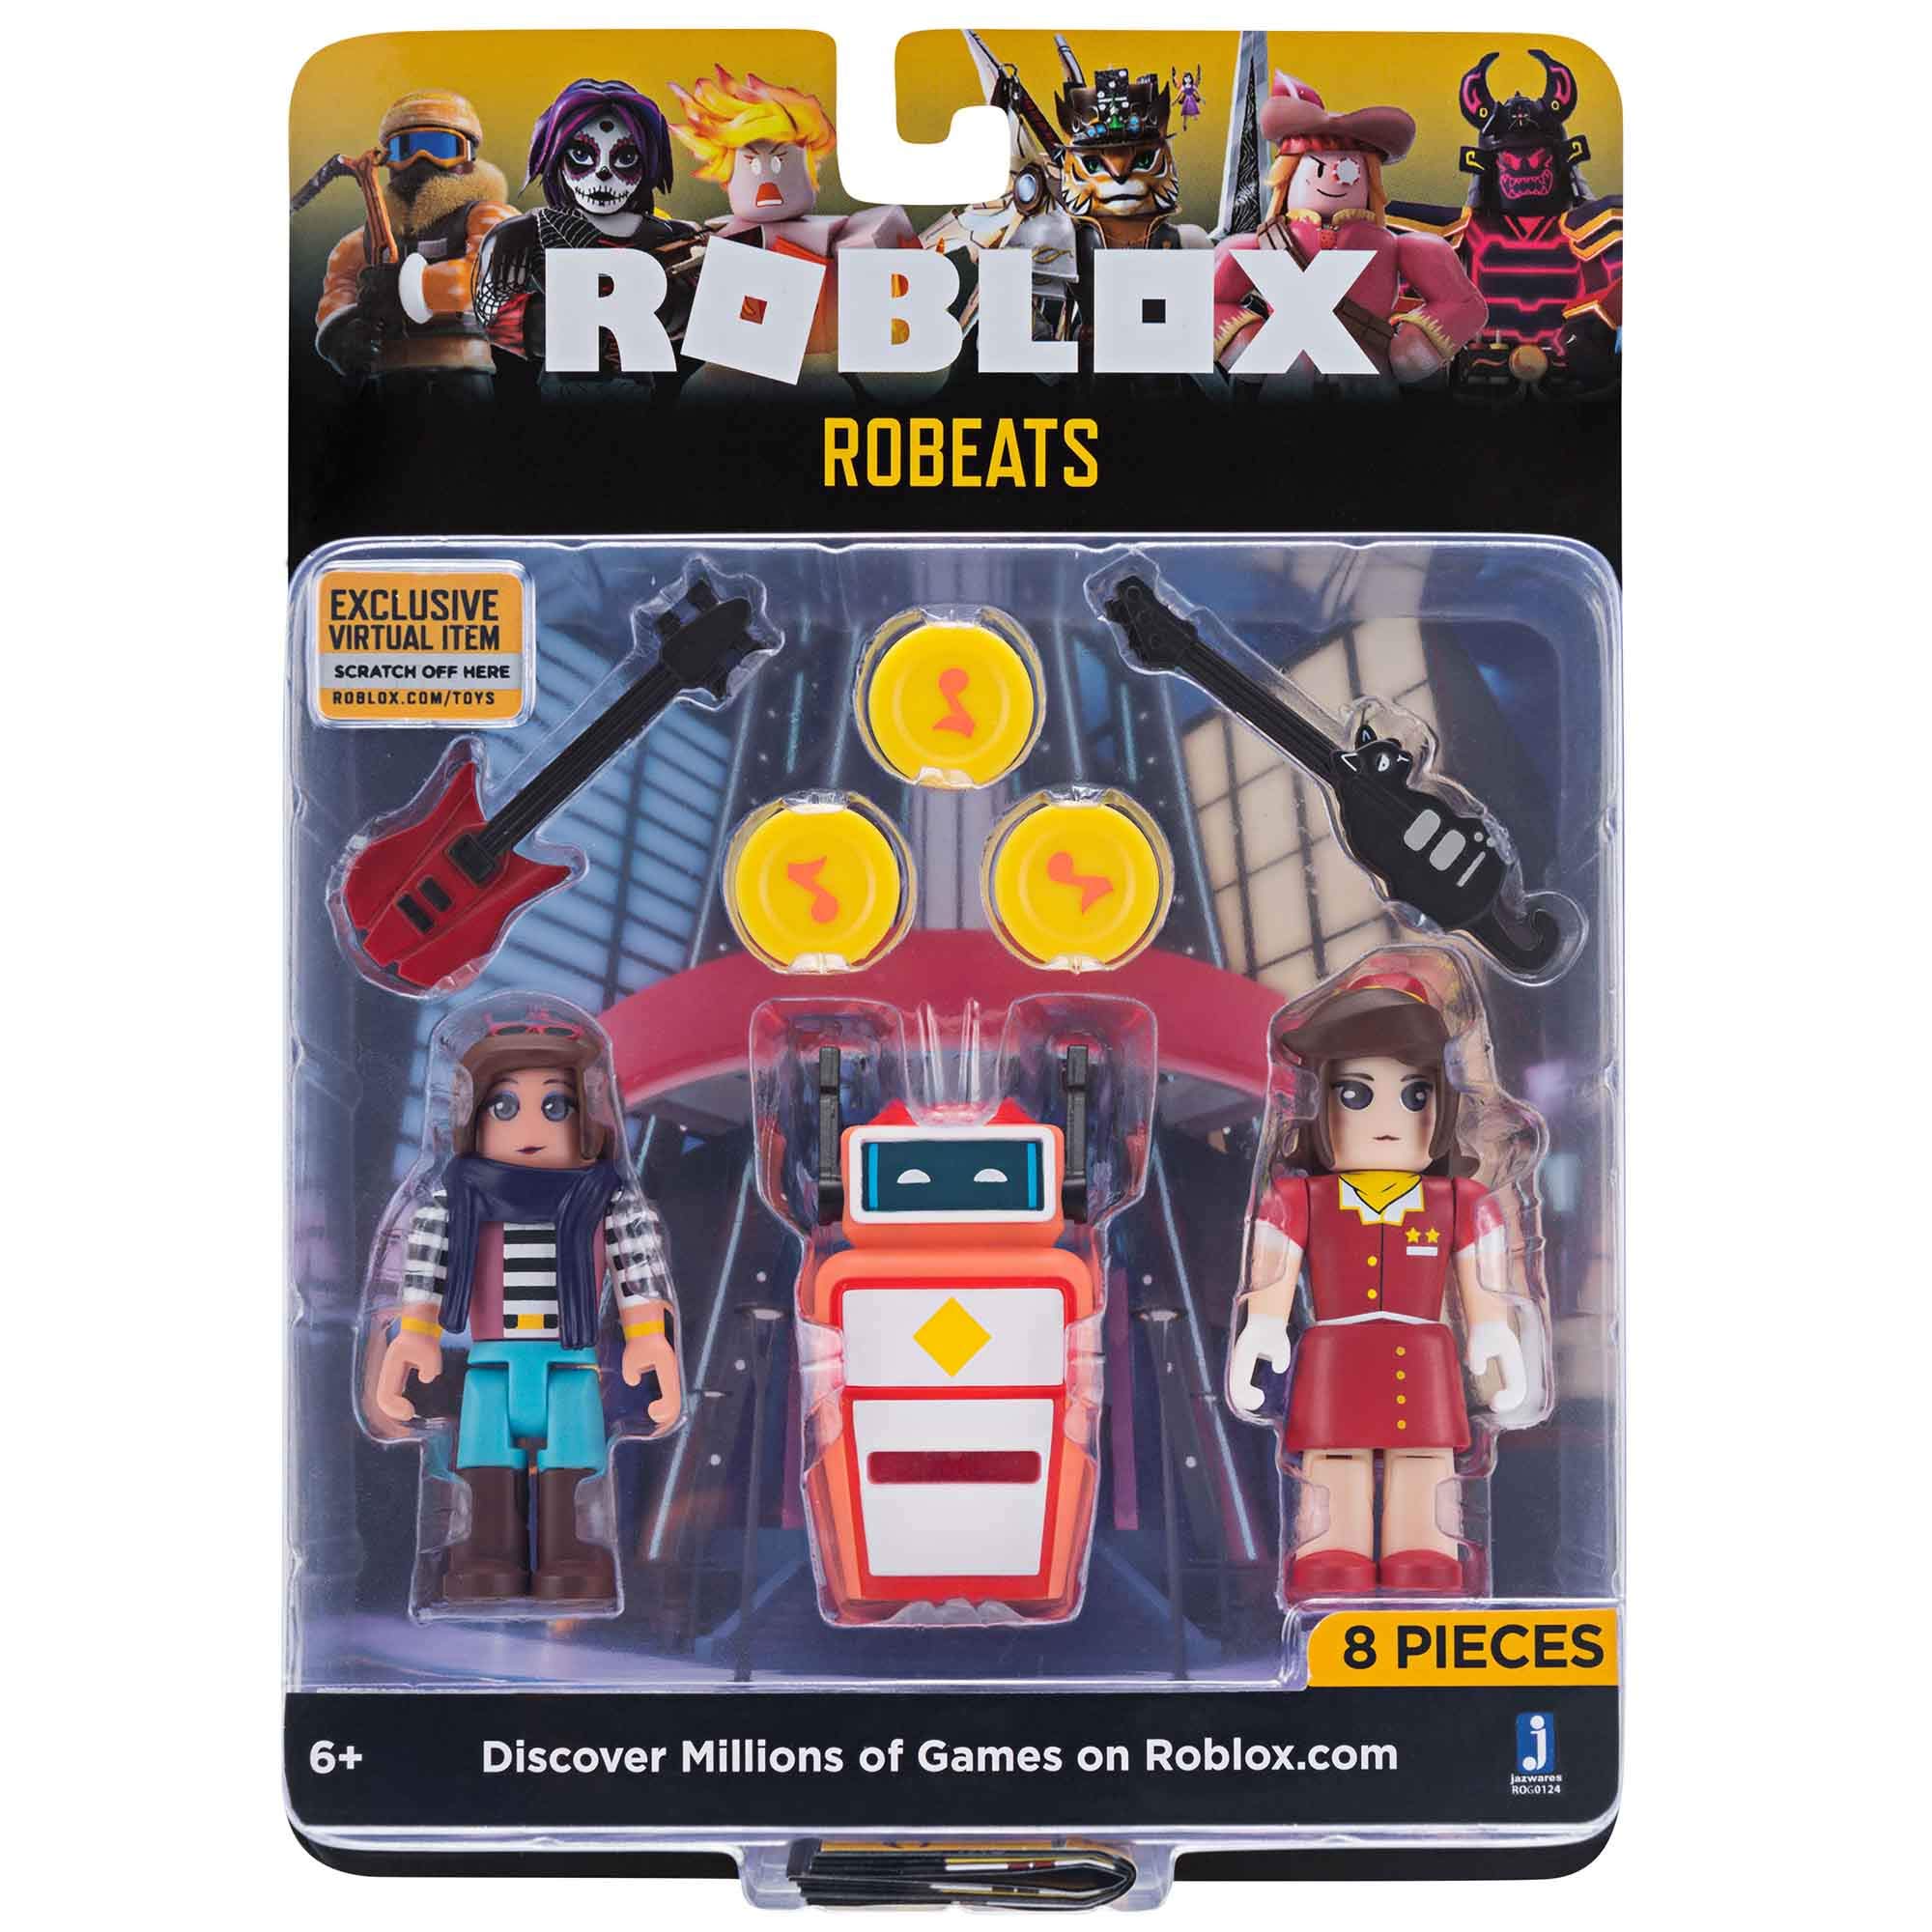 Roblox Celebrity Collection - Robeats Game Pack [Includes Exclusive Virtual Item]